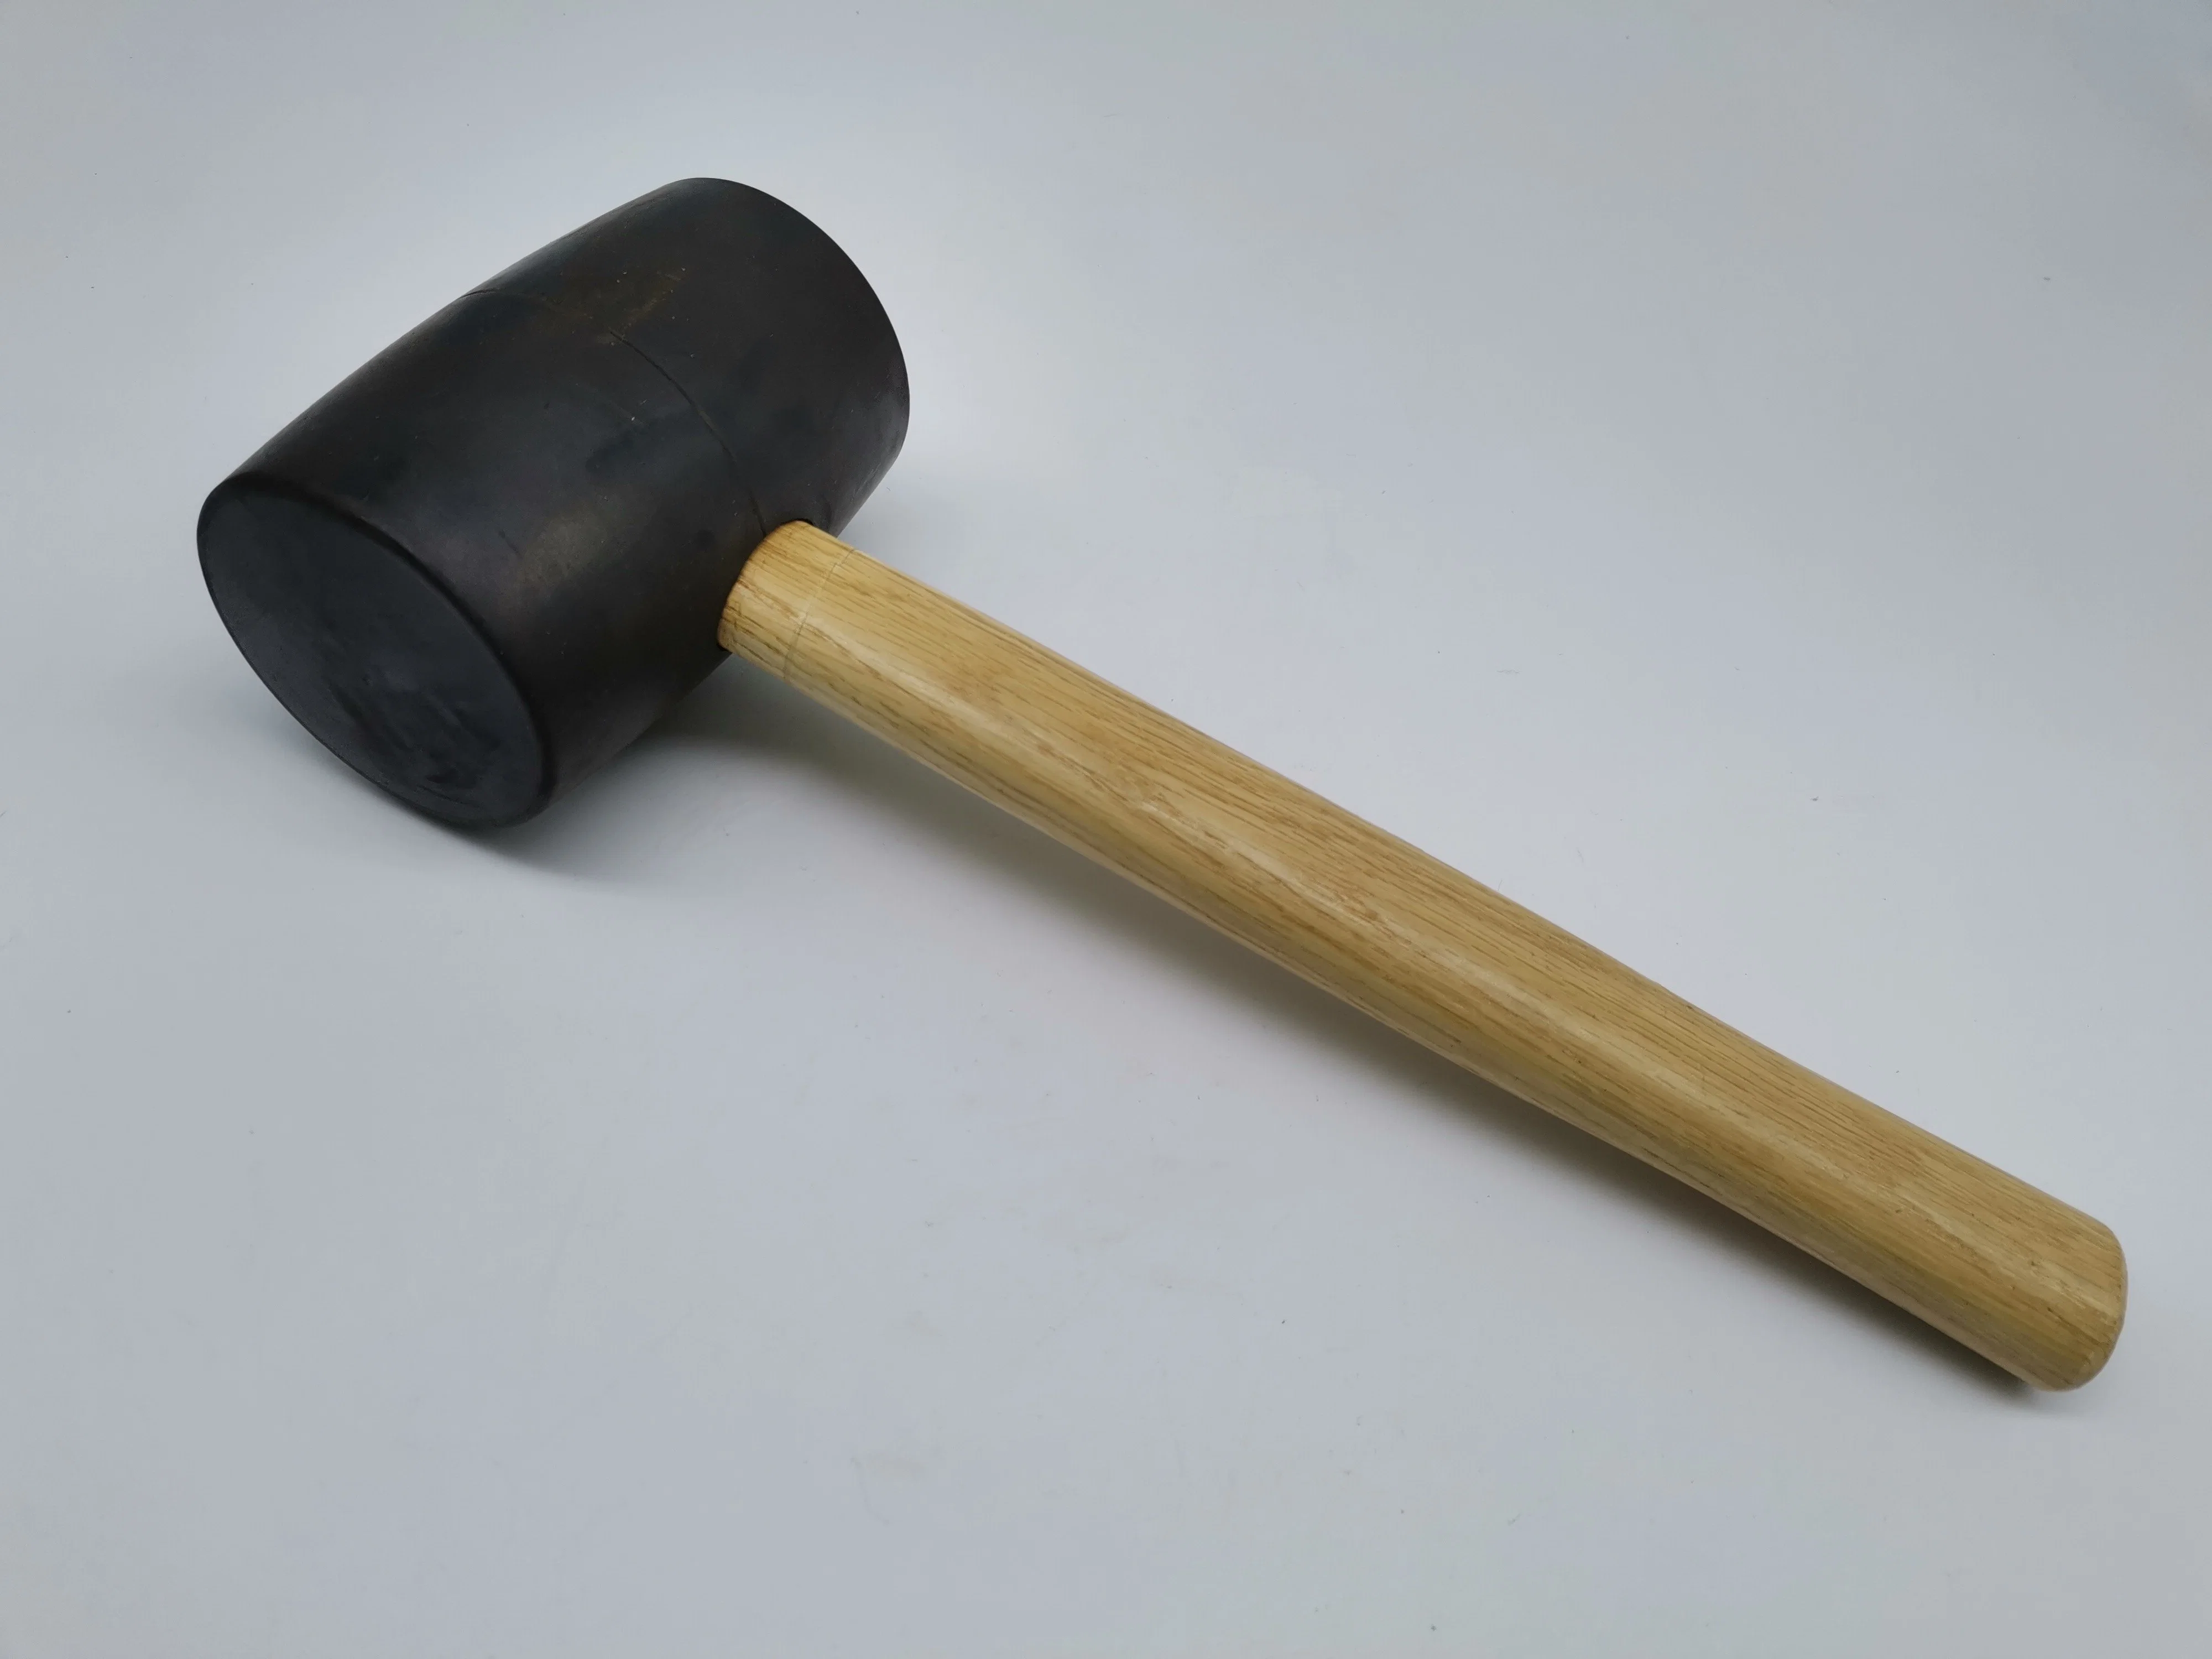 Hight Quality Rubber Mallet Hammer with Fiberglass Handle Hammer with Rubber Mallet